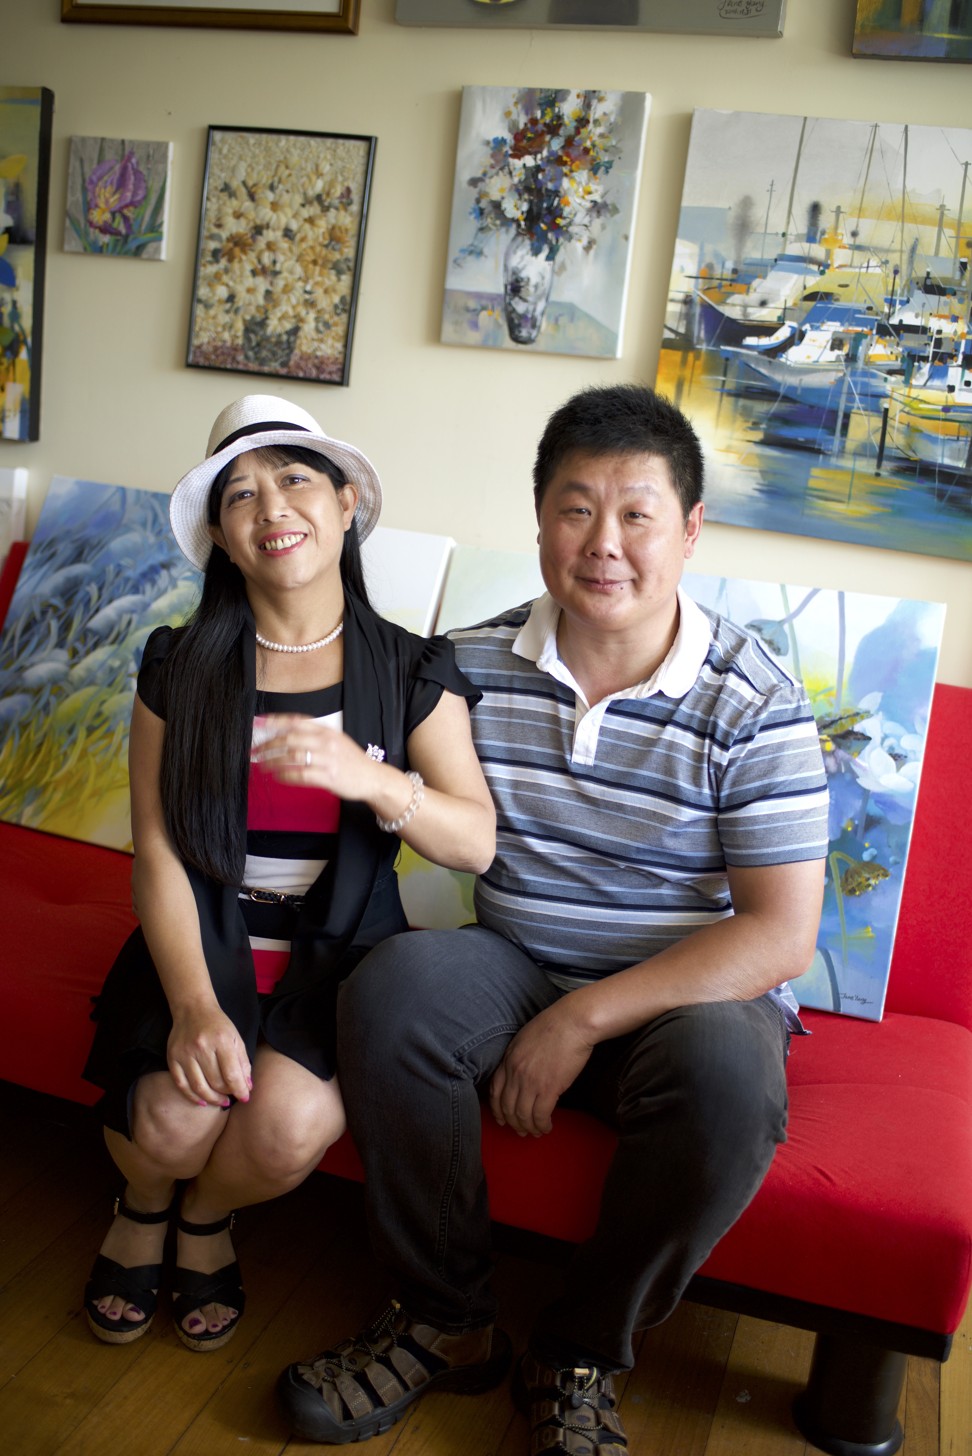 Qing and her husband Donald Yue Dong in her studio in Tasmania. Photo: Tamara Thiessen